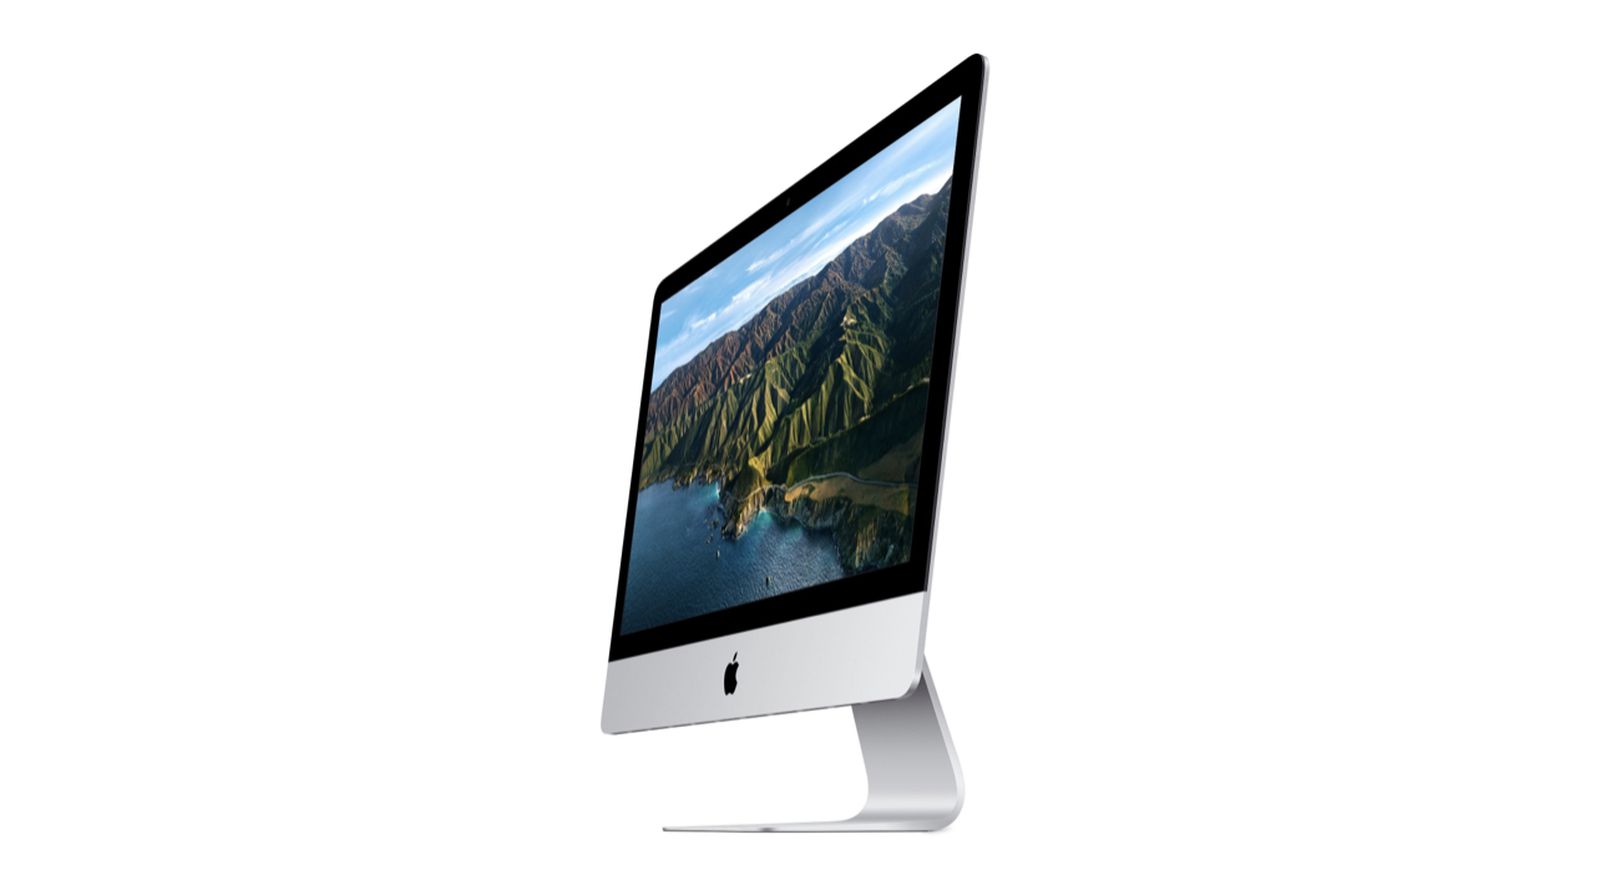 Have We Seen the Last of the 27-inch iMac? - MacRumors